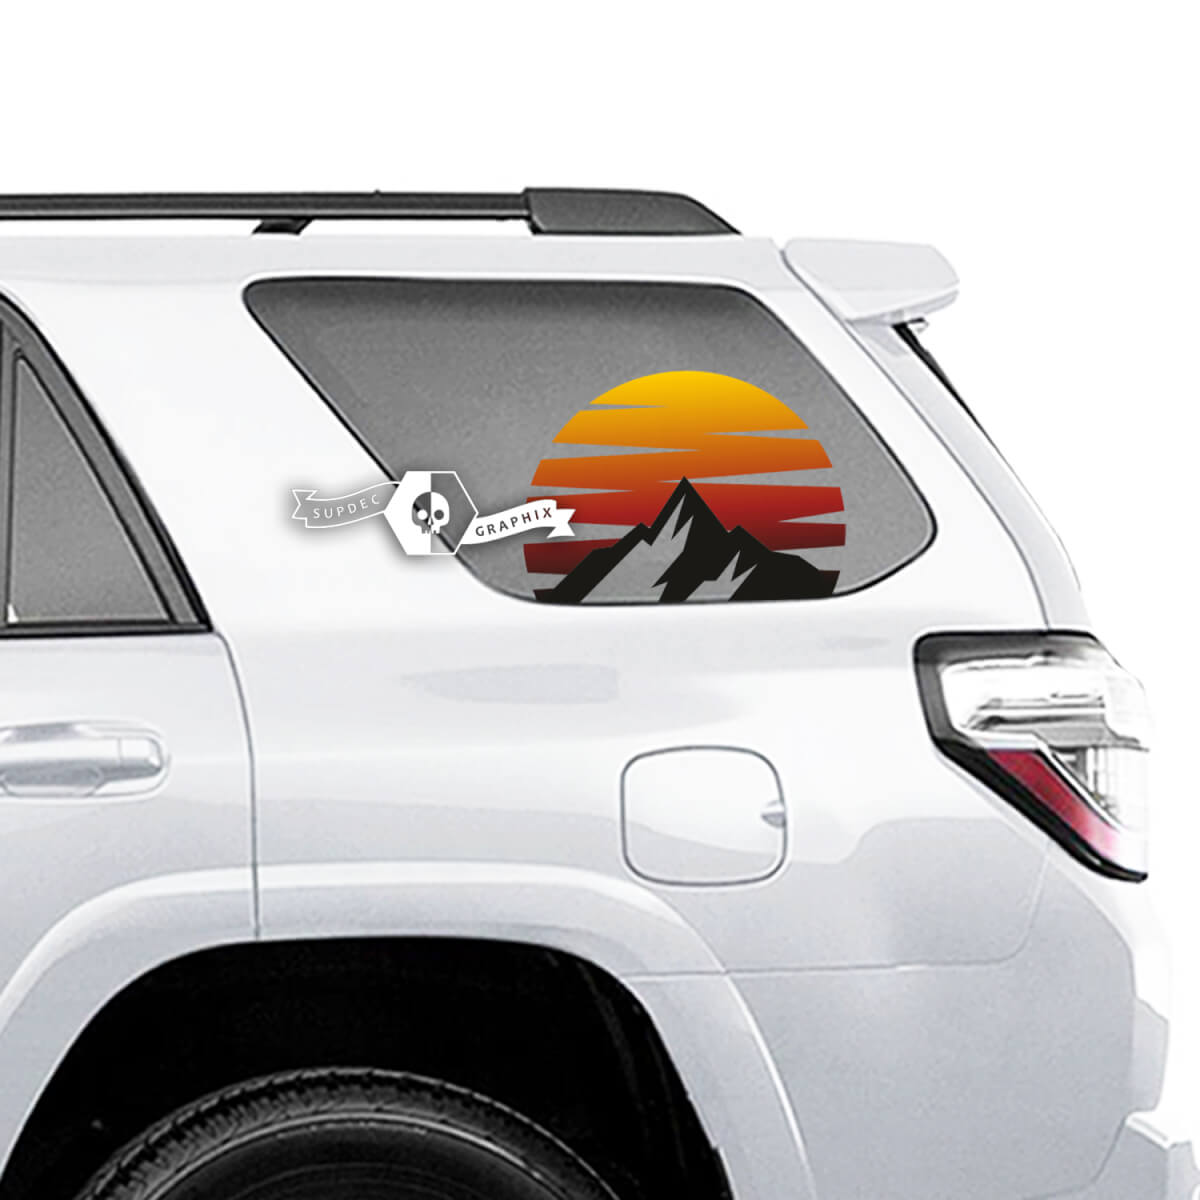 Pair of 4Runner Window Mountains SunSet Retro Side Vinyl Decals Stickers for Toyota 4Runner - Colored
